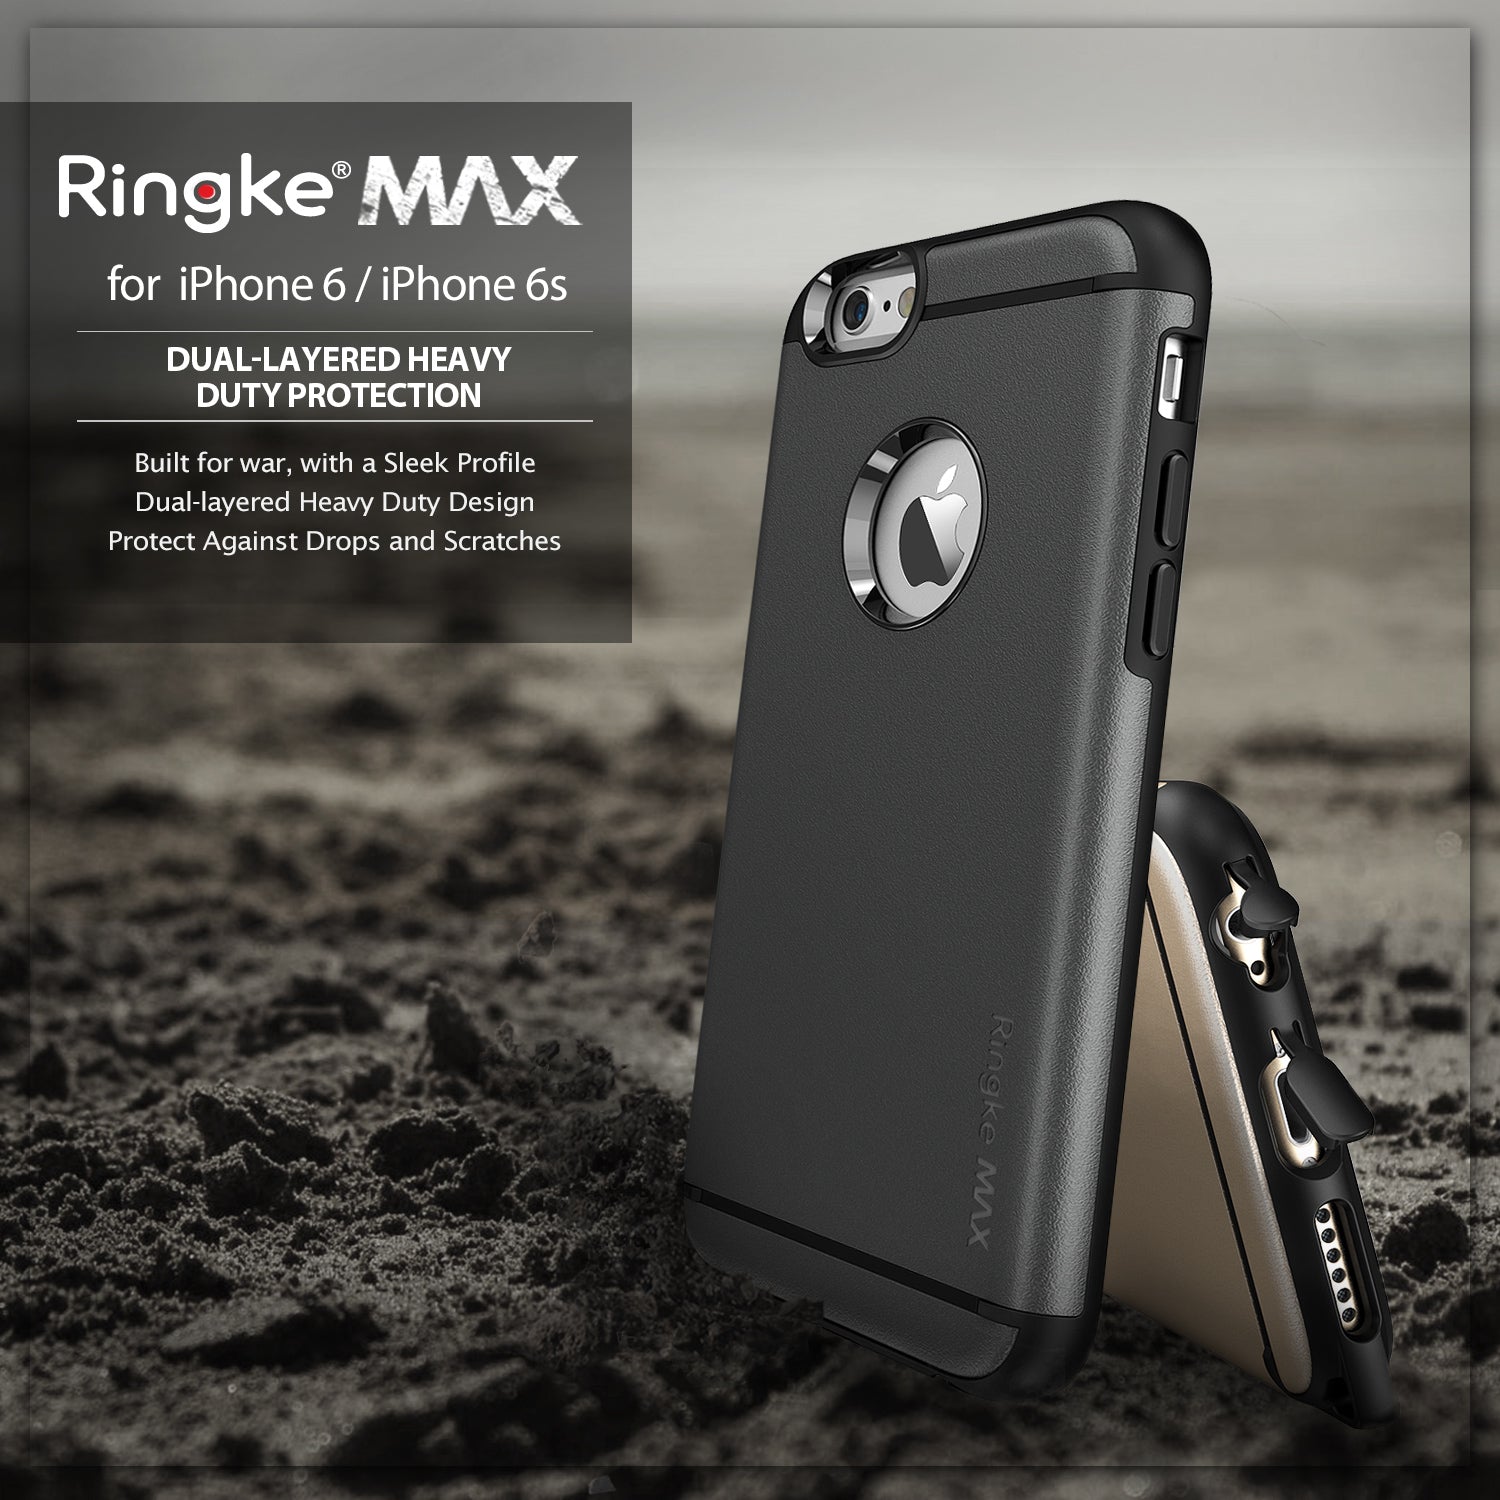 ringke max heavy duty rugged hard case cover for iphone 6 6s main drop protection